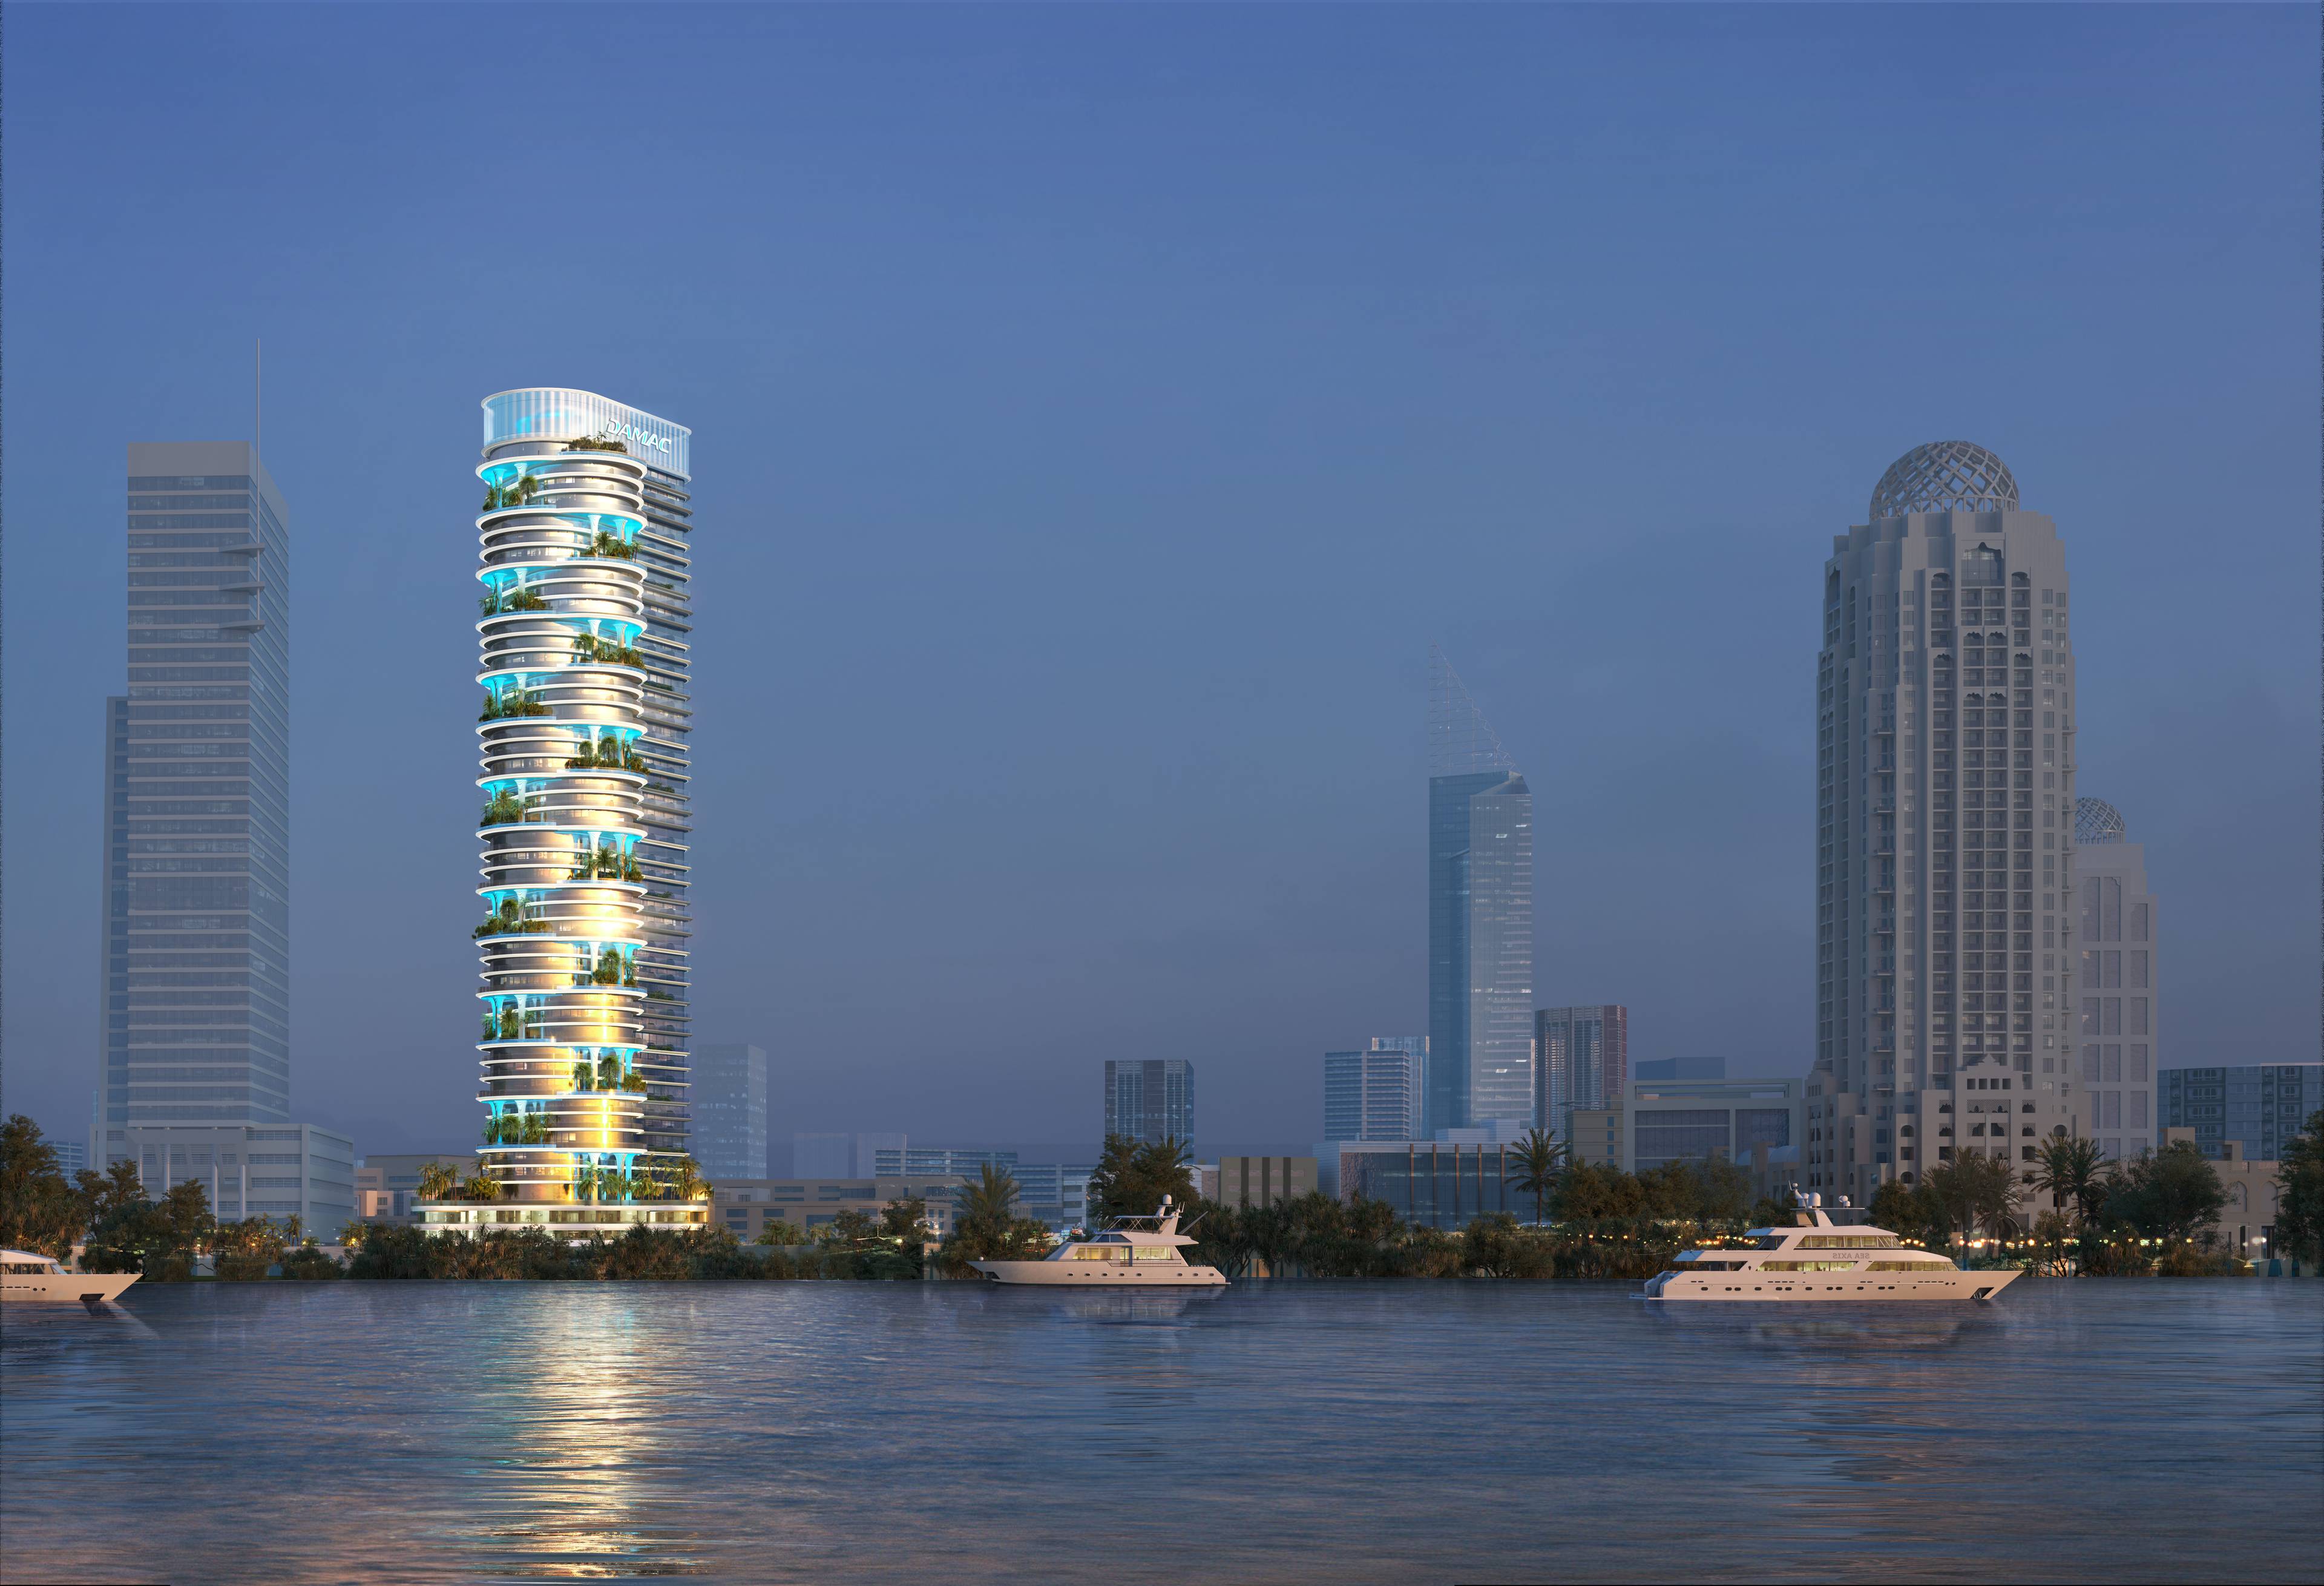 LUXURIOUS 2-BEDROOM, 2000+ SQ FT RESIDENCE IN AL SUFOUH WITH AQUATIC SPLENDOR, ARTISTIC FLAIR, AND UNPARALLELED AMENITIES